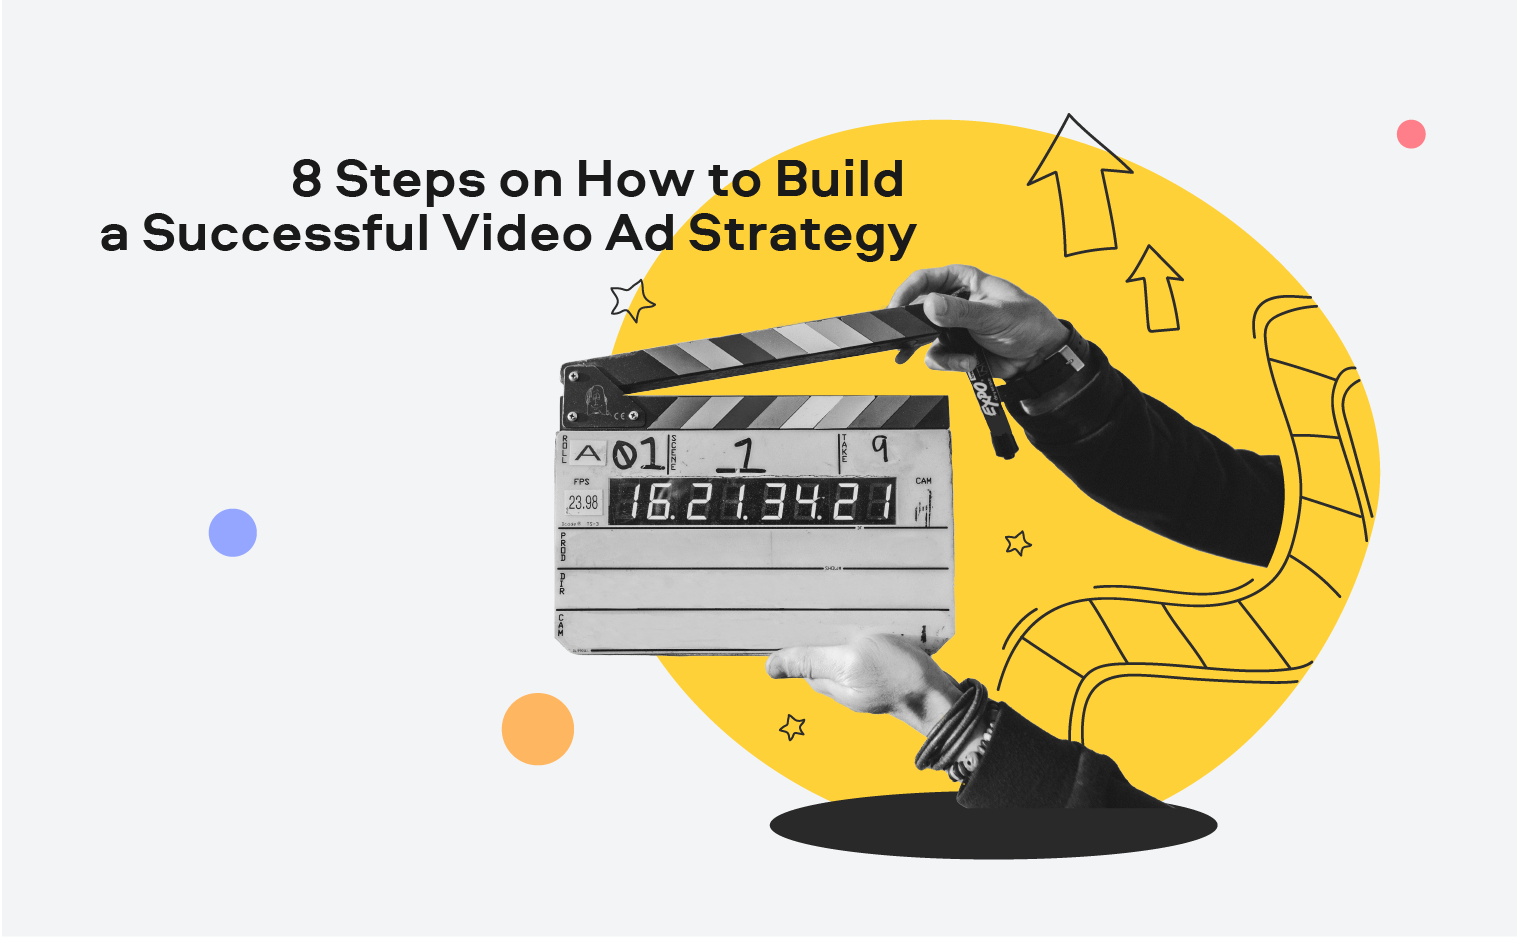 8 Steps on How to Build a Successful Video Ad Strategy